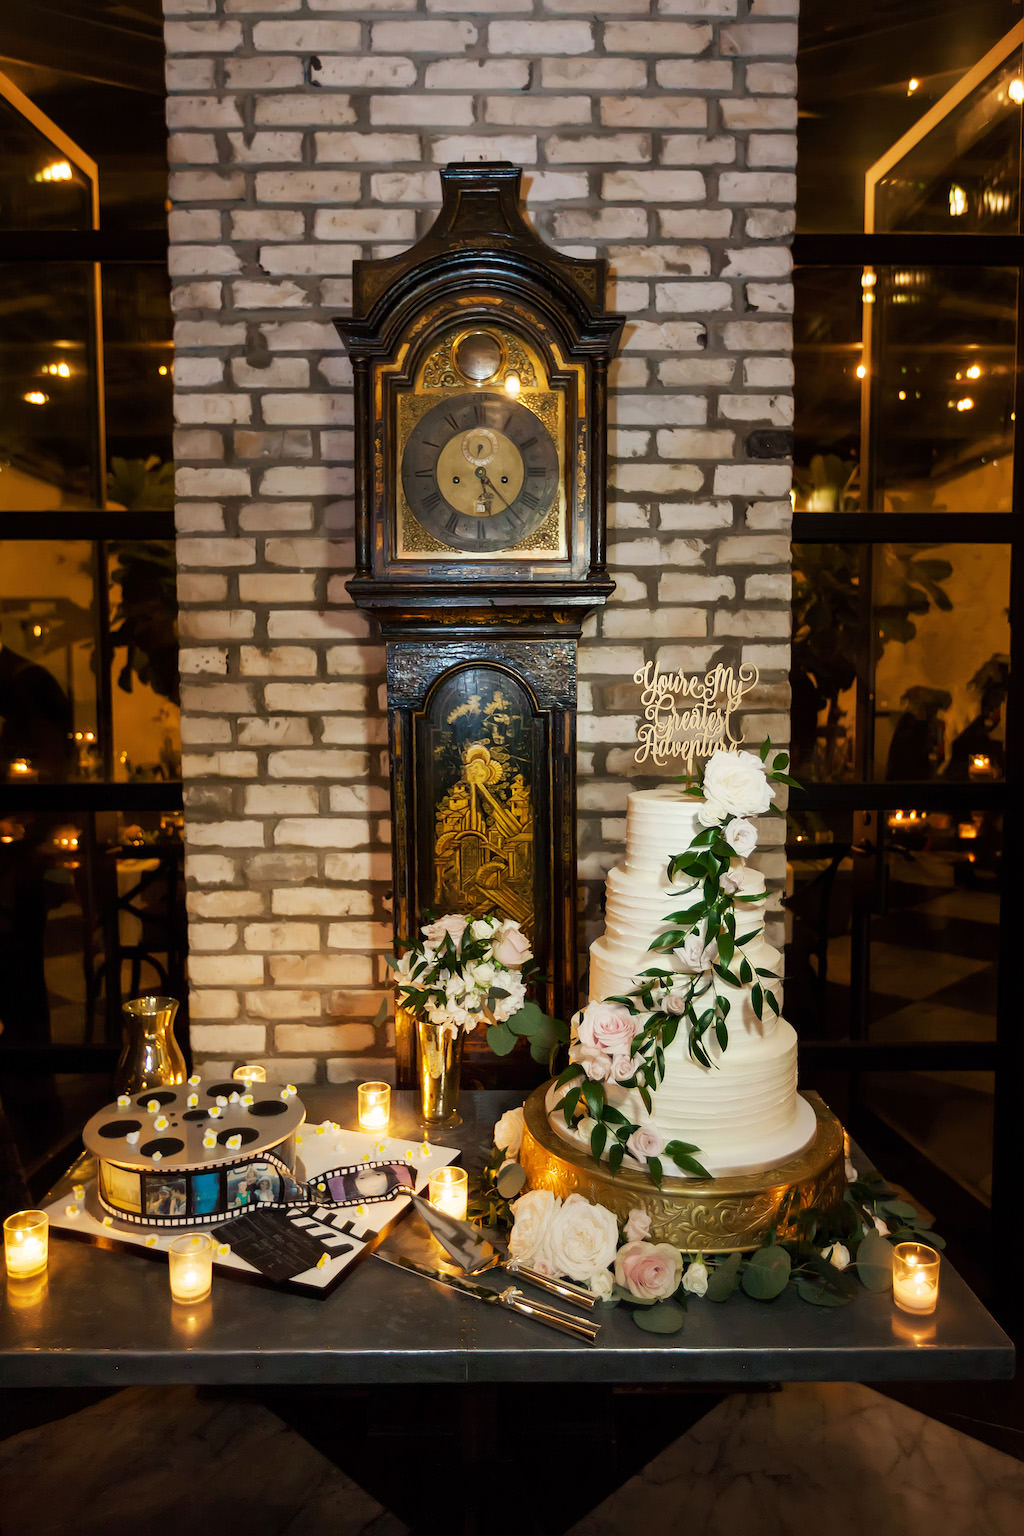 Industrial Chic Wedding Reception Dessert Table with Four Tier Round White Wedding Cake with Pink Floral and Greenery on Gold Cake Stand with Stylish Custom Cake Topper, and Film Reel Groom's Cake | Downtown Tampa Venue Oxford Exchange